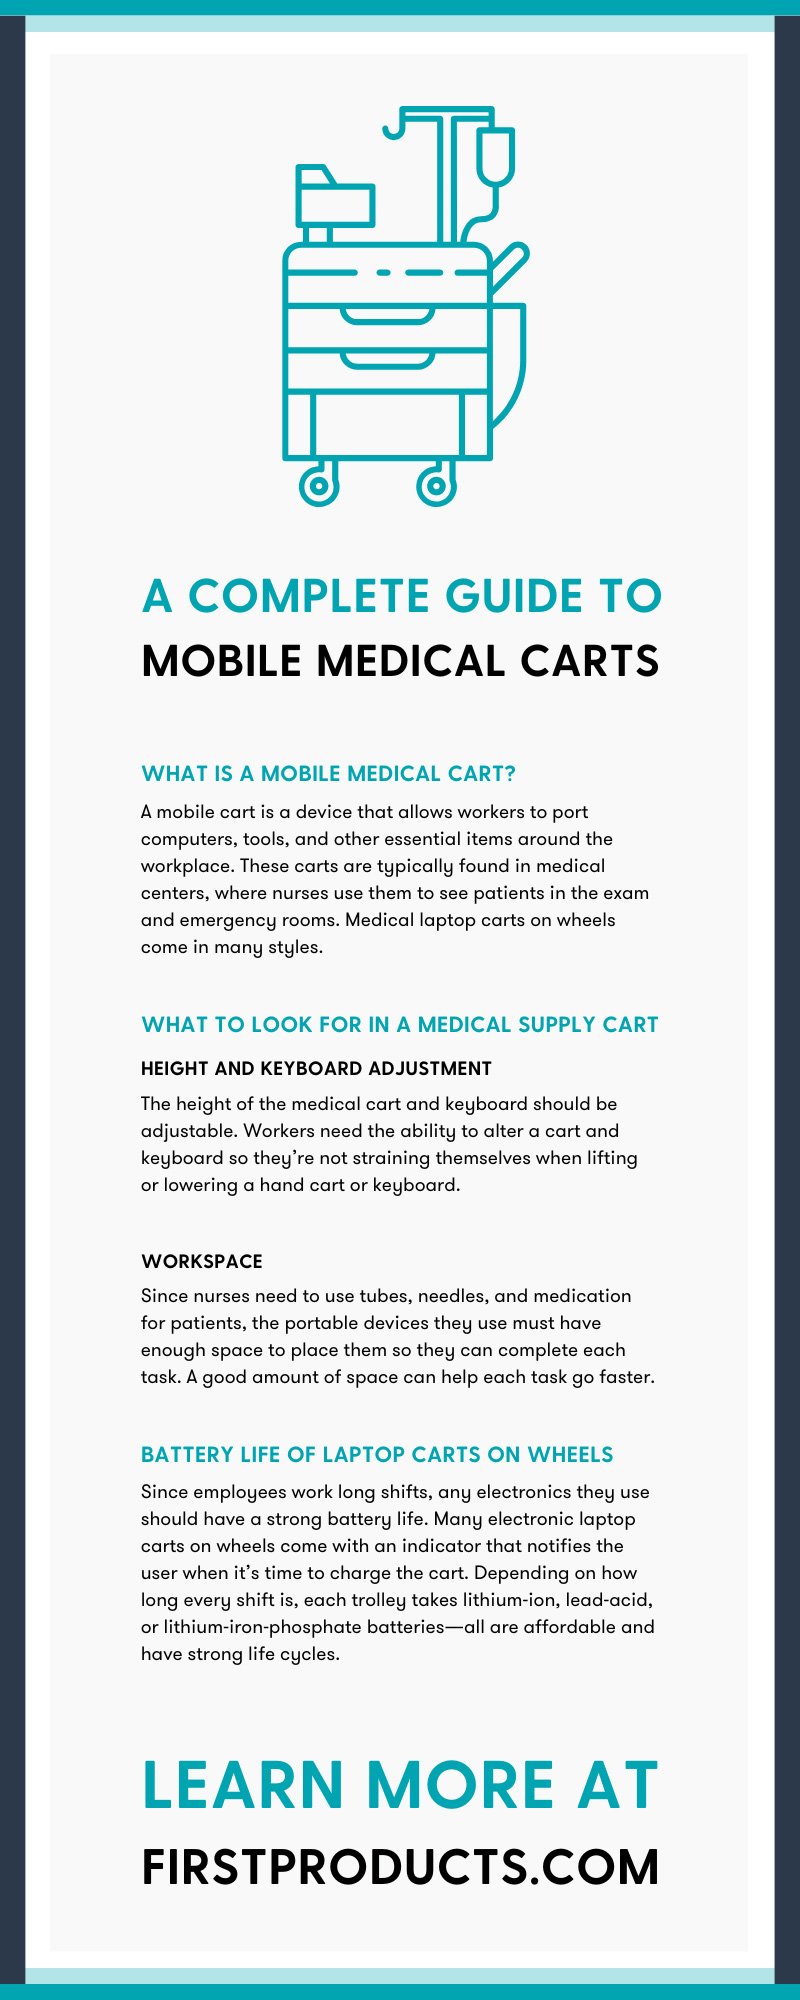 A Complete Guide to Mobile Medical Carts